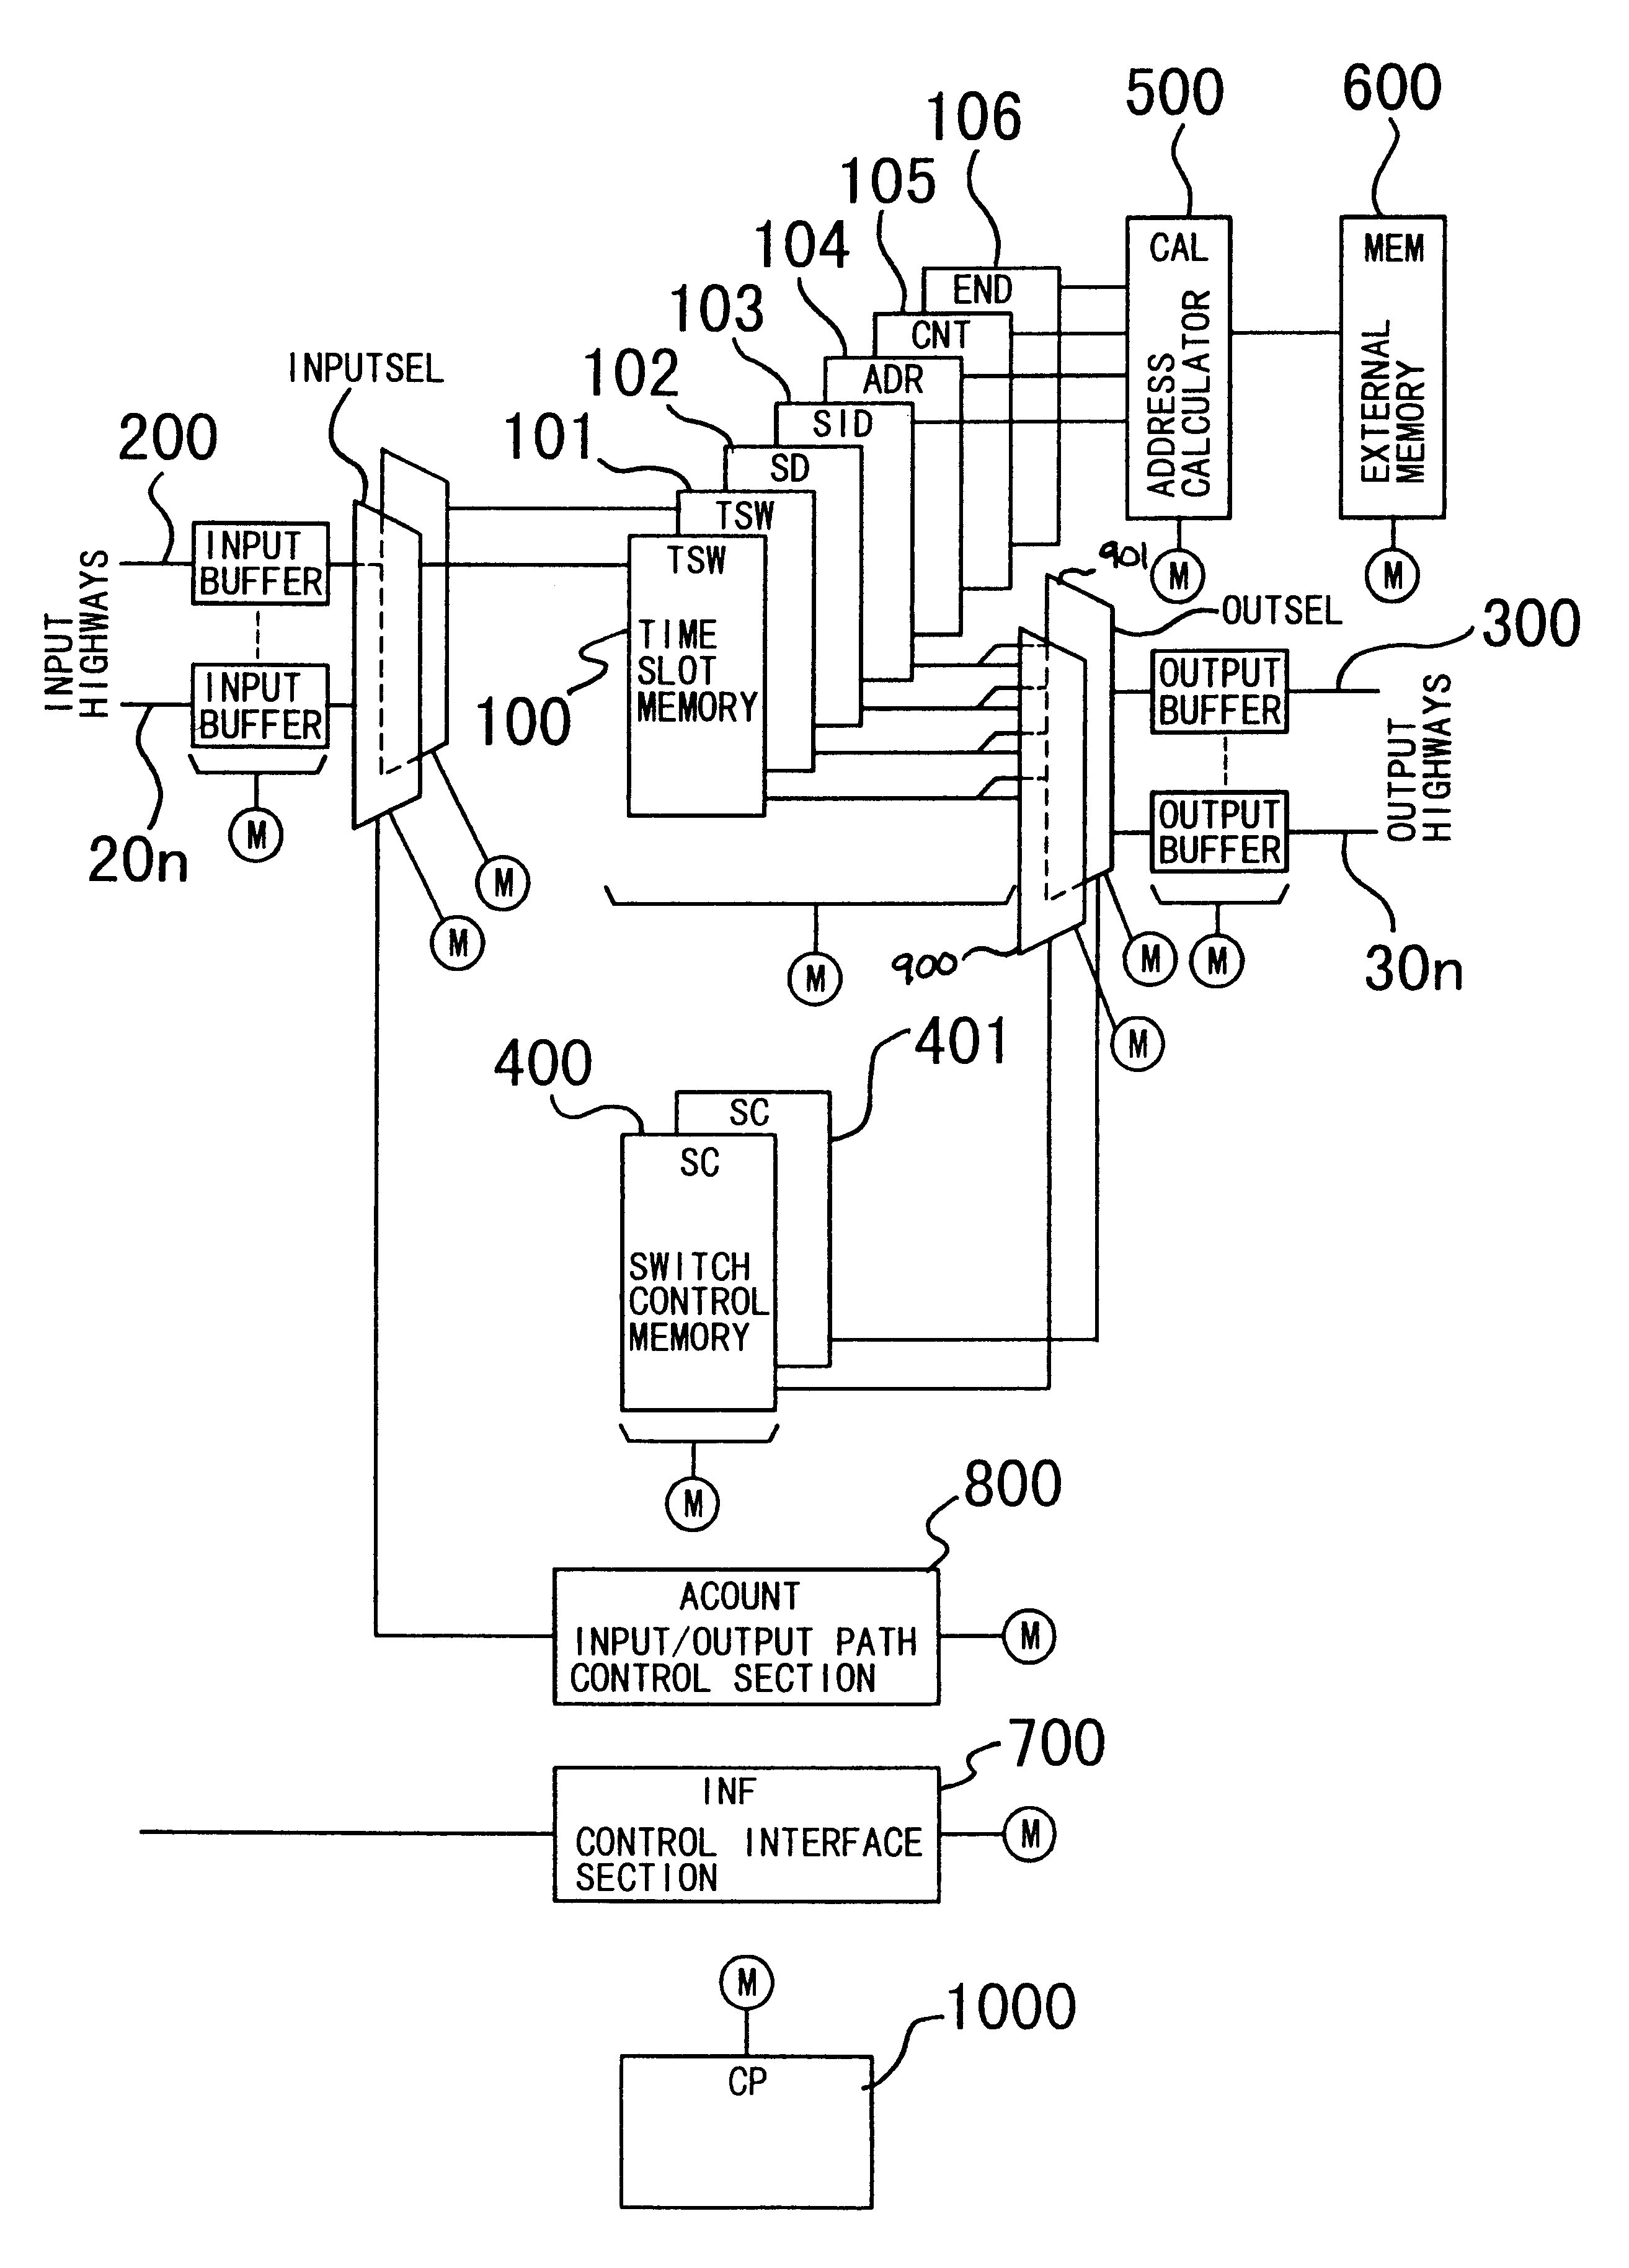 Time division switch with inserter and dropper using external memory and time division switching method